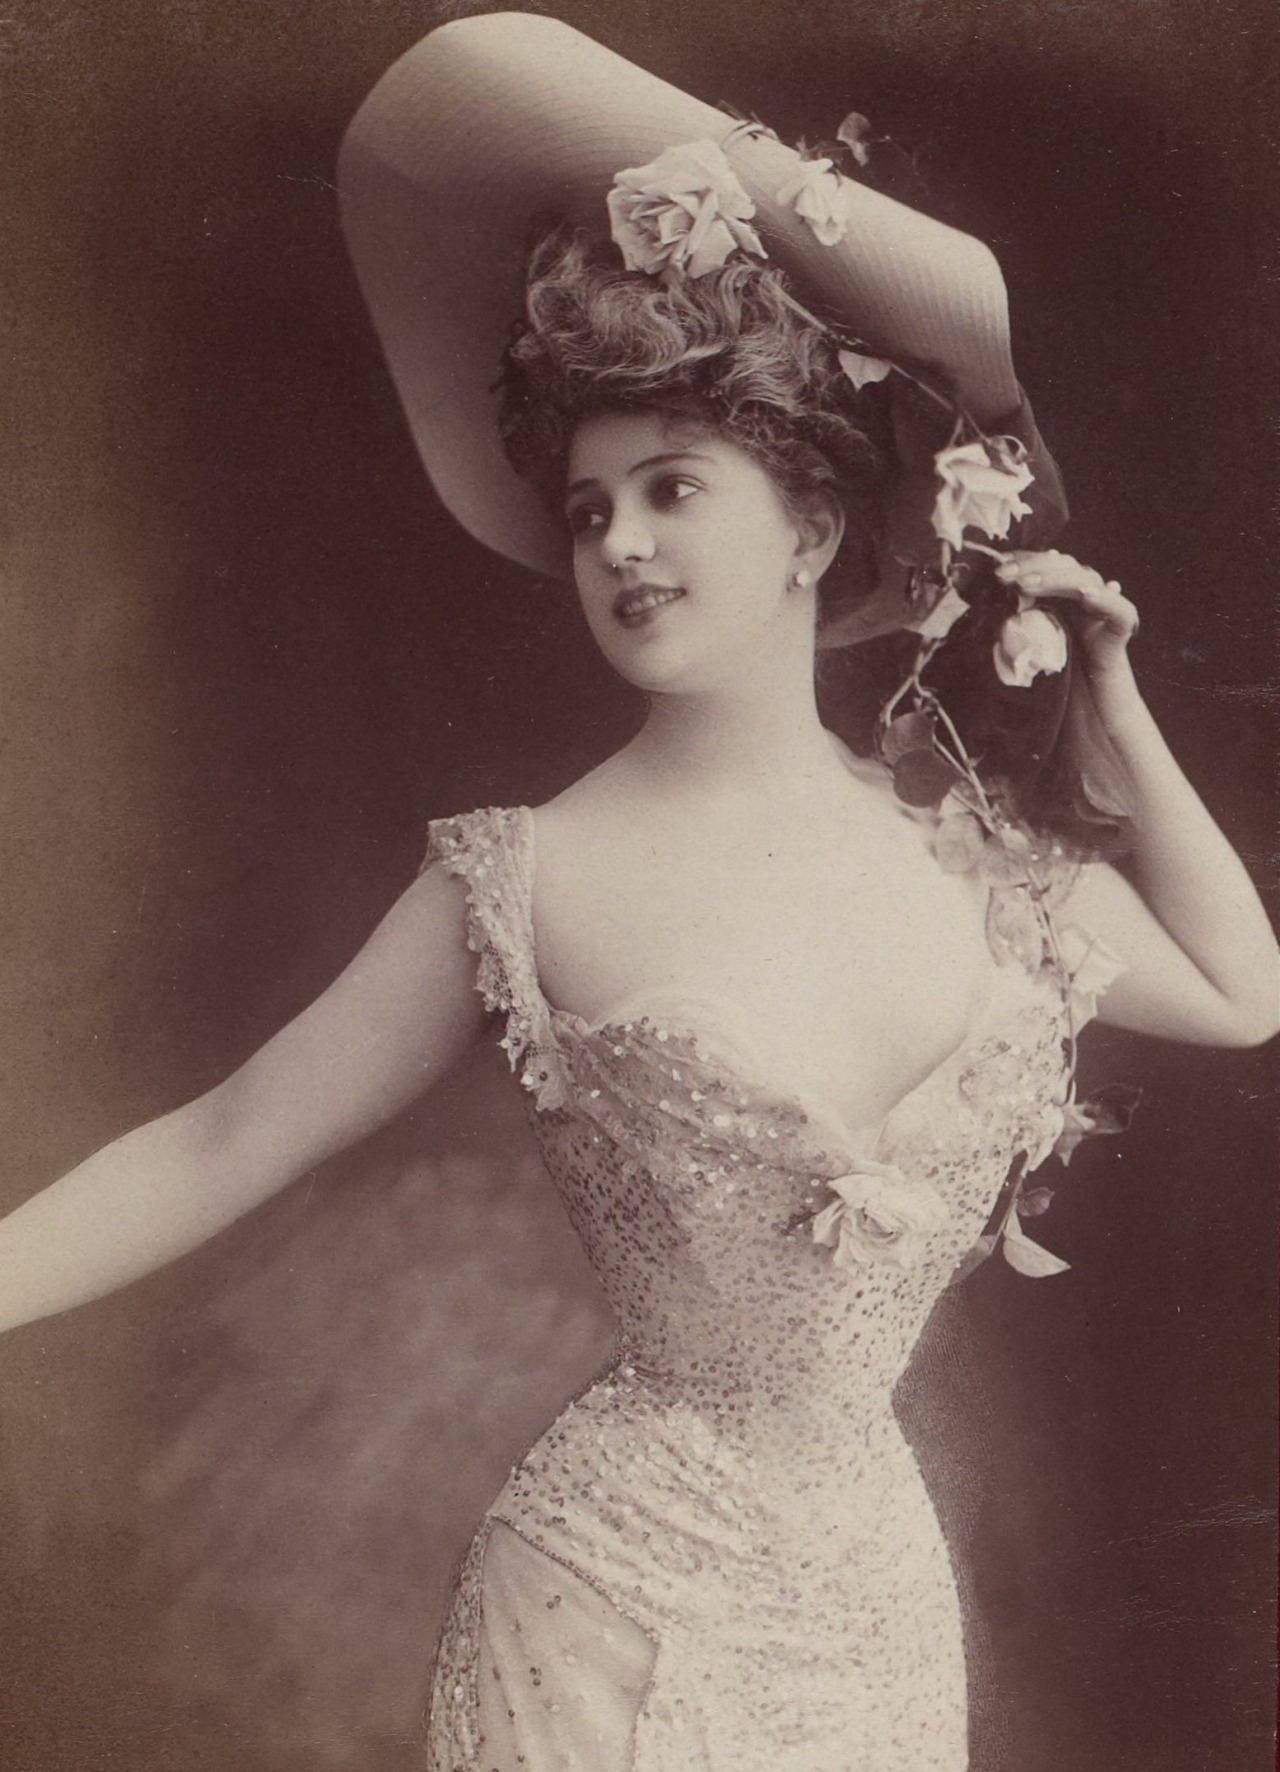 French dancer and actress Arlette Dorgère

